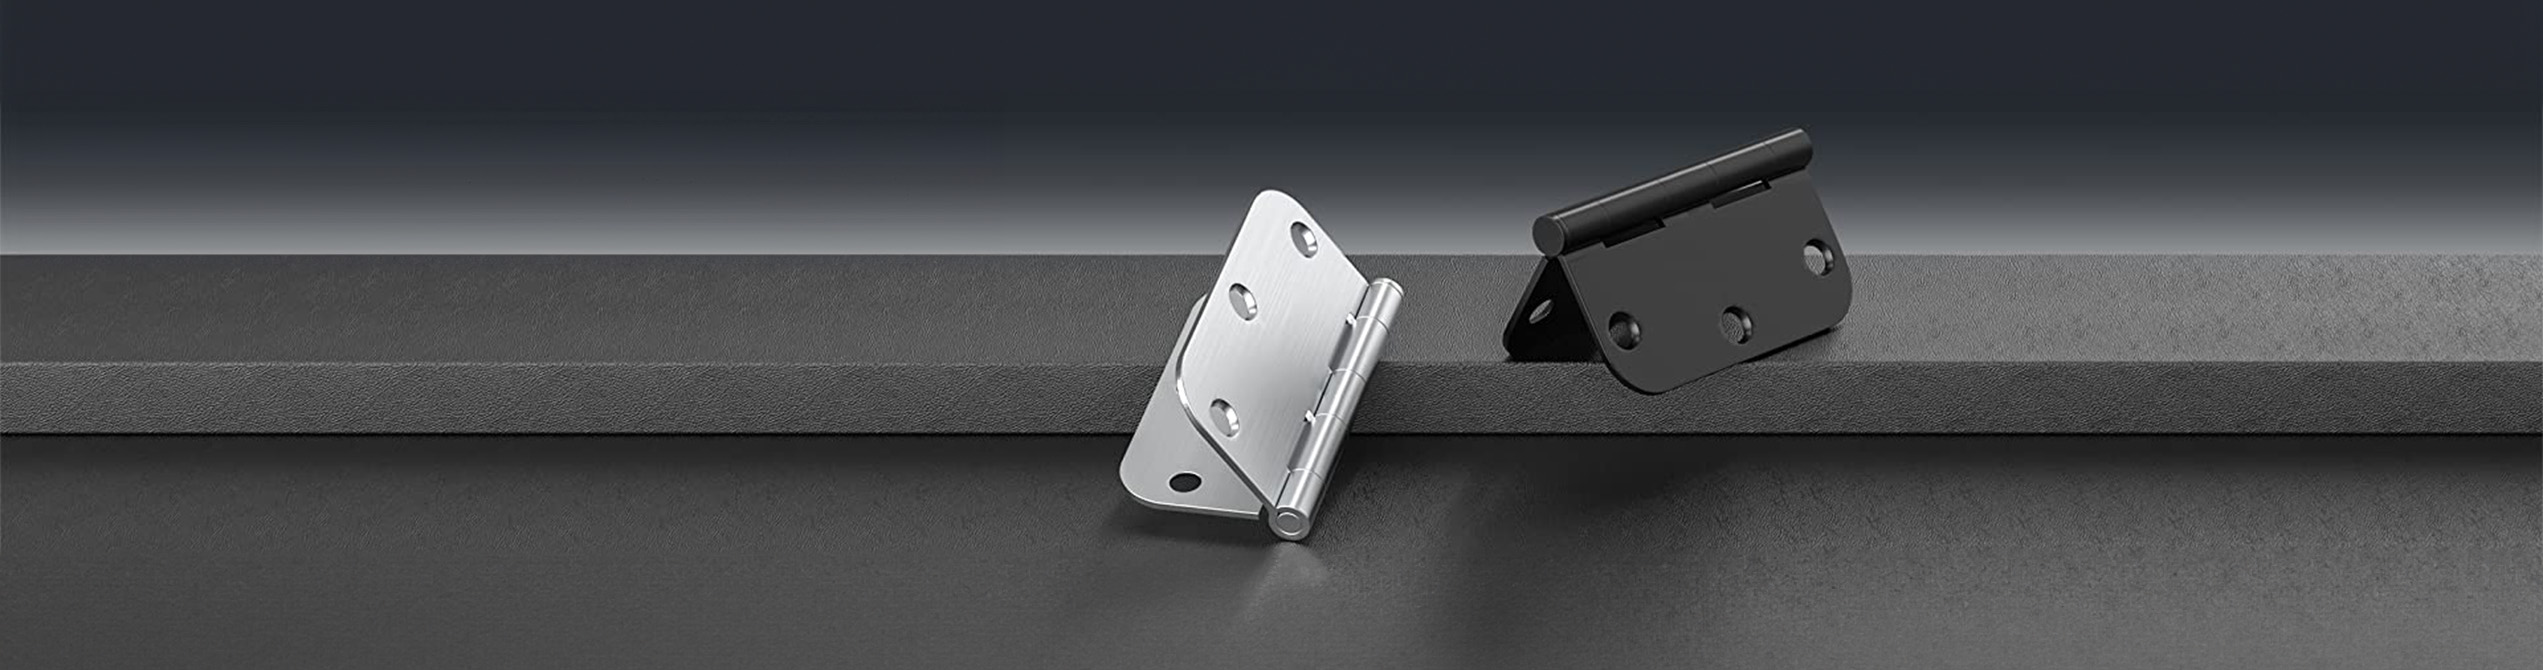 High-Quality, Durable and Stylish Spring Hinges for Doors